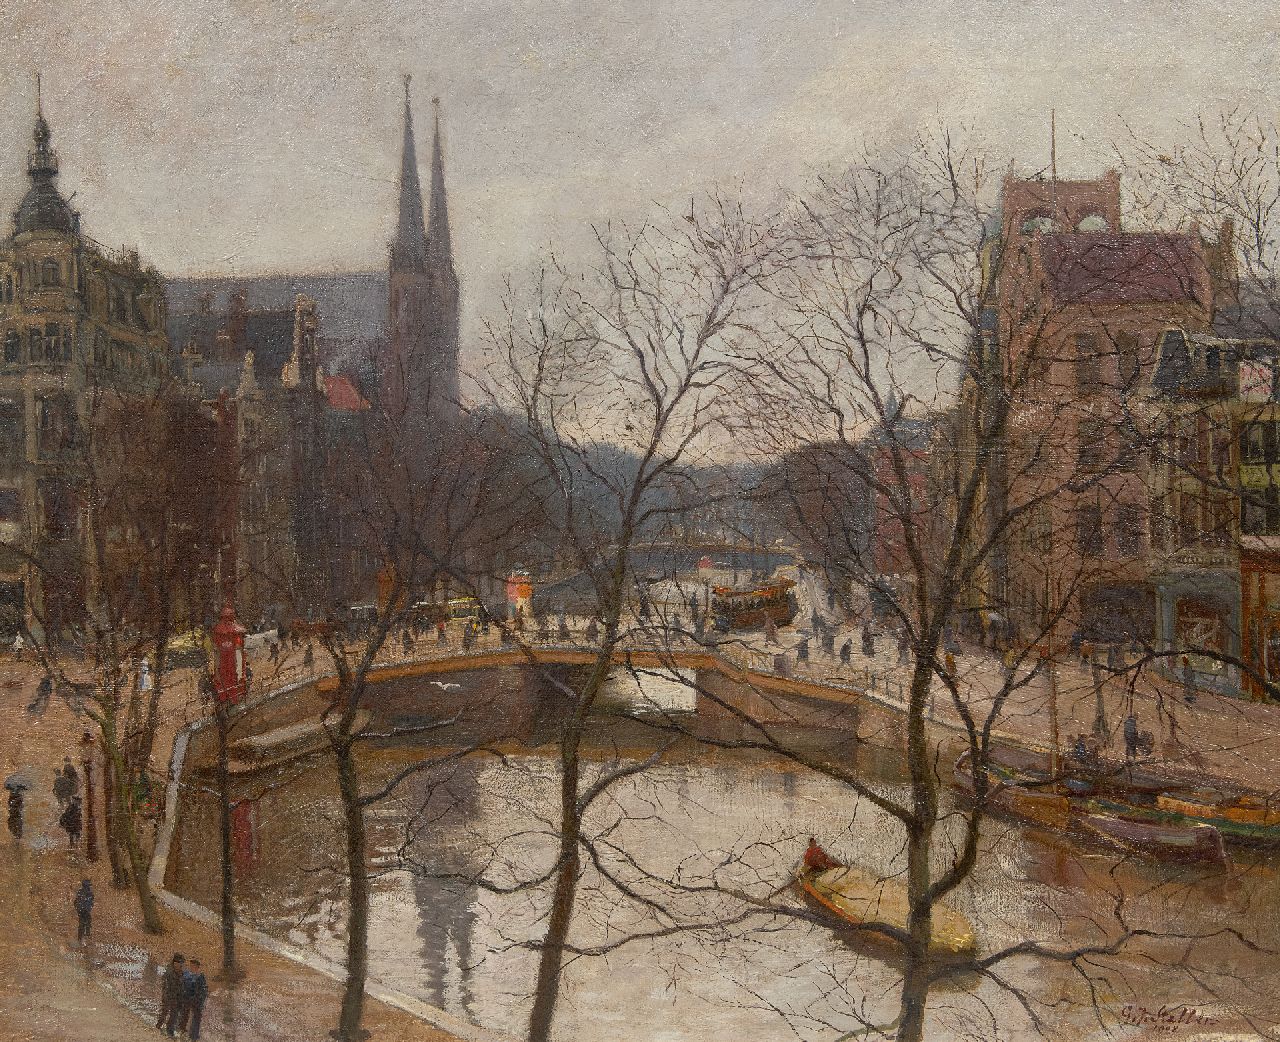 Staller G.J.  | Gerard Johan Staller | Paintings offered for sale | A view of Koningsplein with De Krijtberg church in Amsterdam, oil on canvas 54.6 x 65.6 cm, signed l.r. and dated 1908